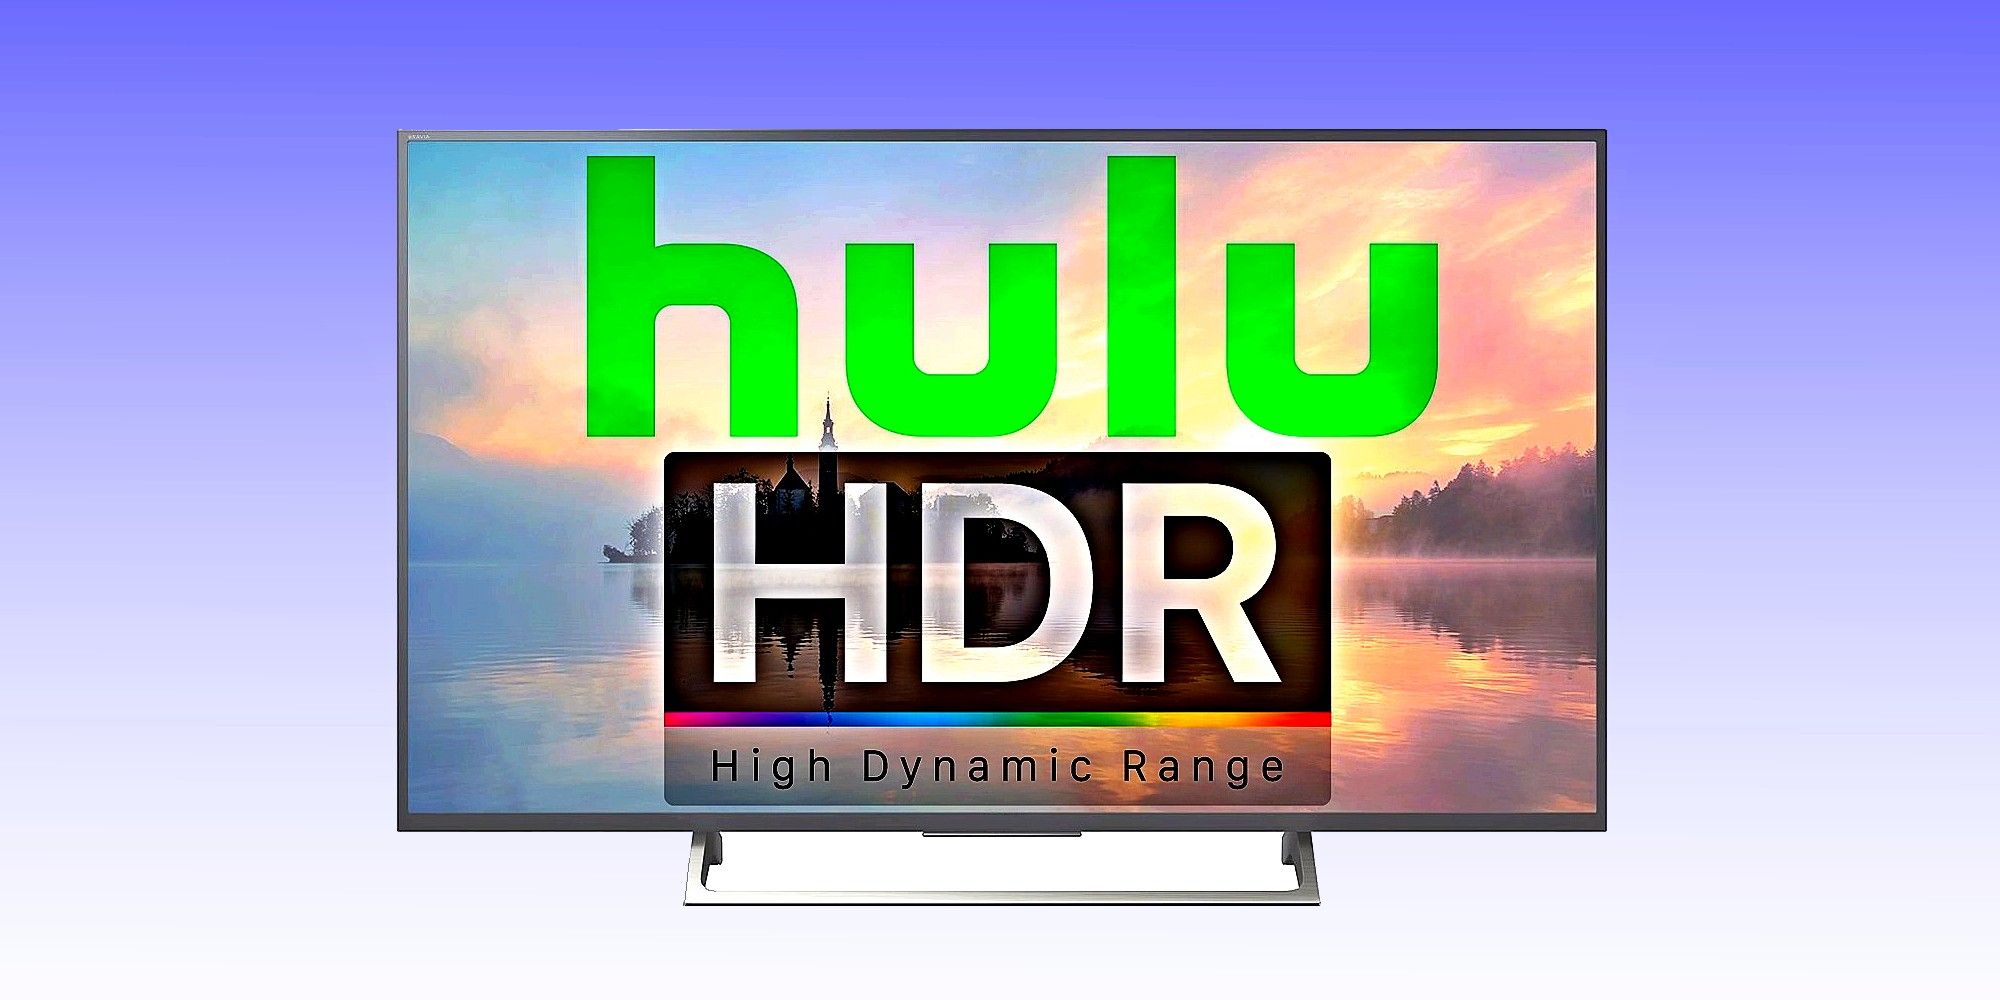 Hulu HDR Content Every Current Show & Movie With HDR Support